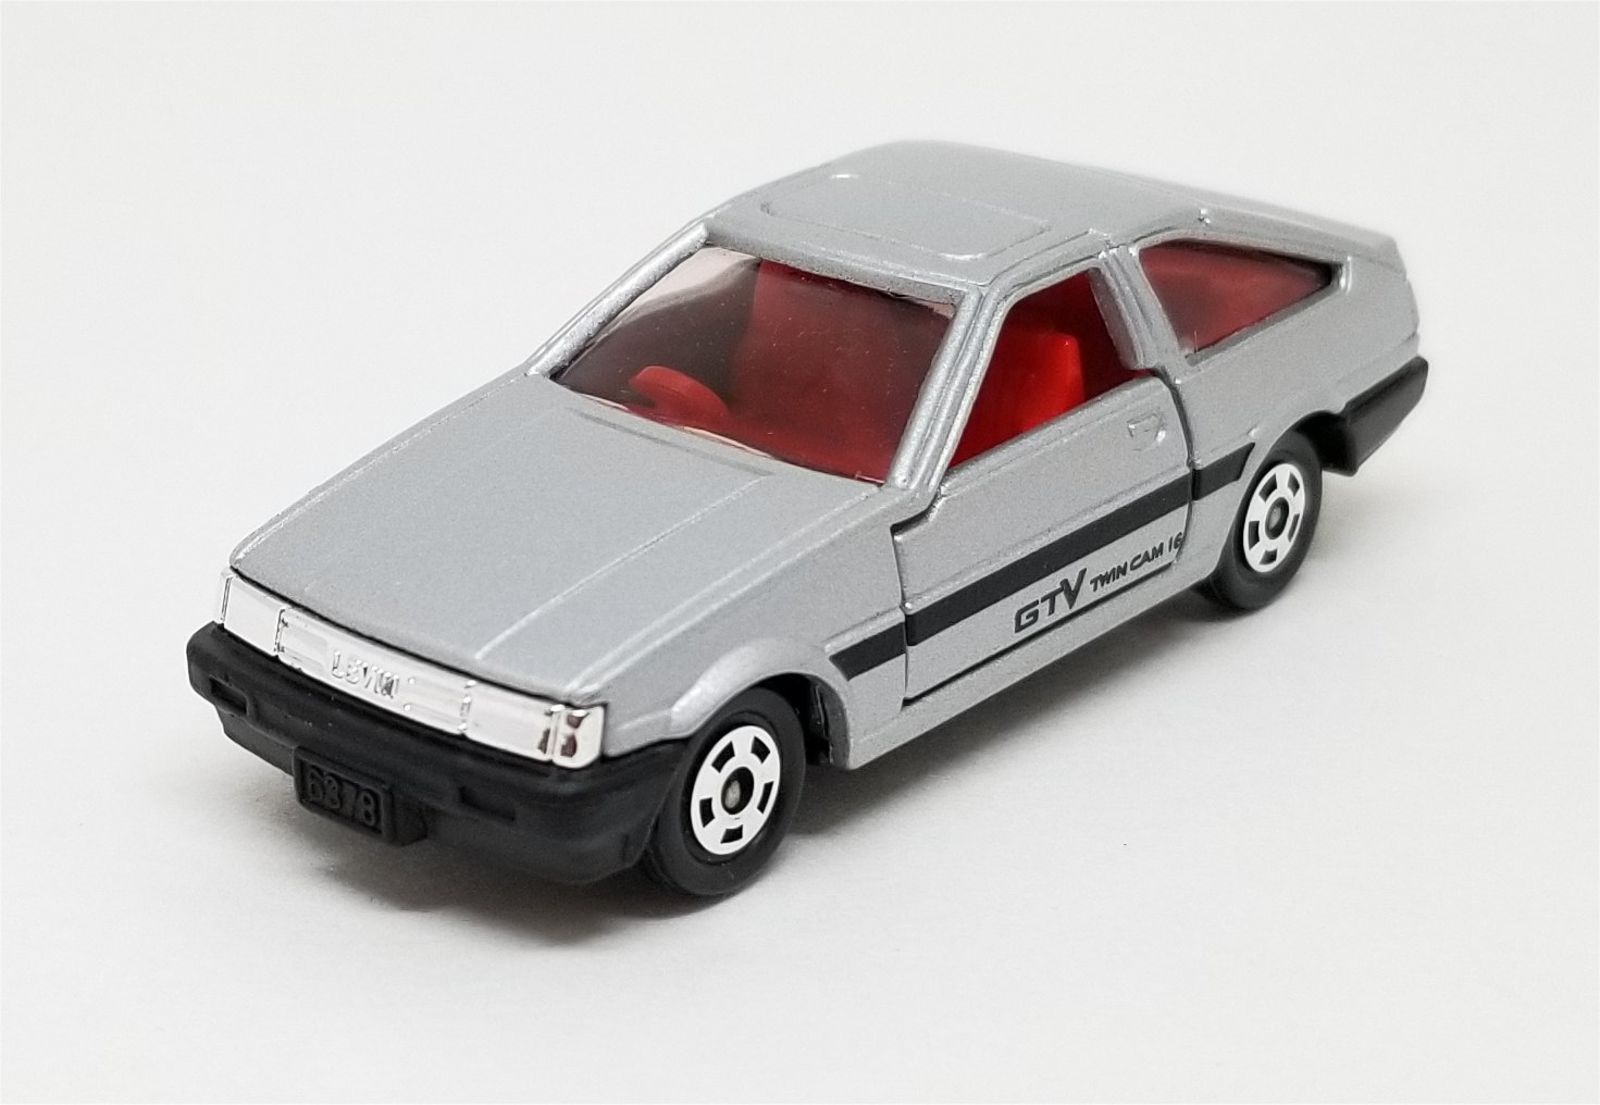 Illustration for article titled LaLD Car Week: Tomica Toyota Corolla Levin GTV